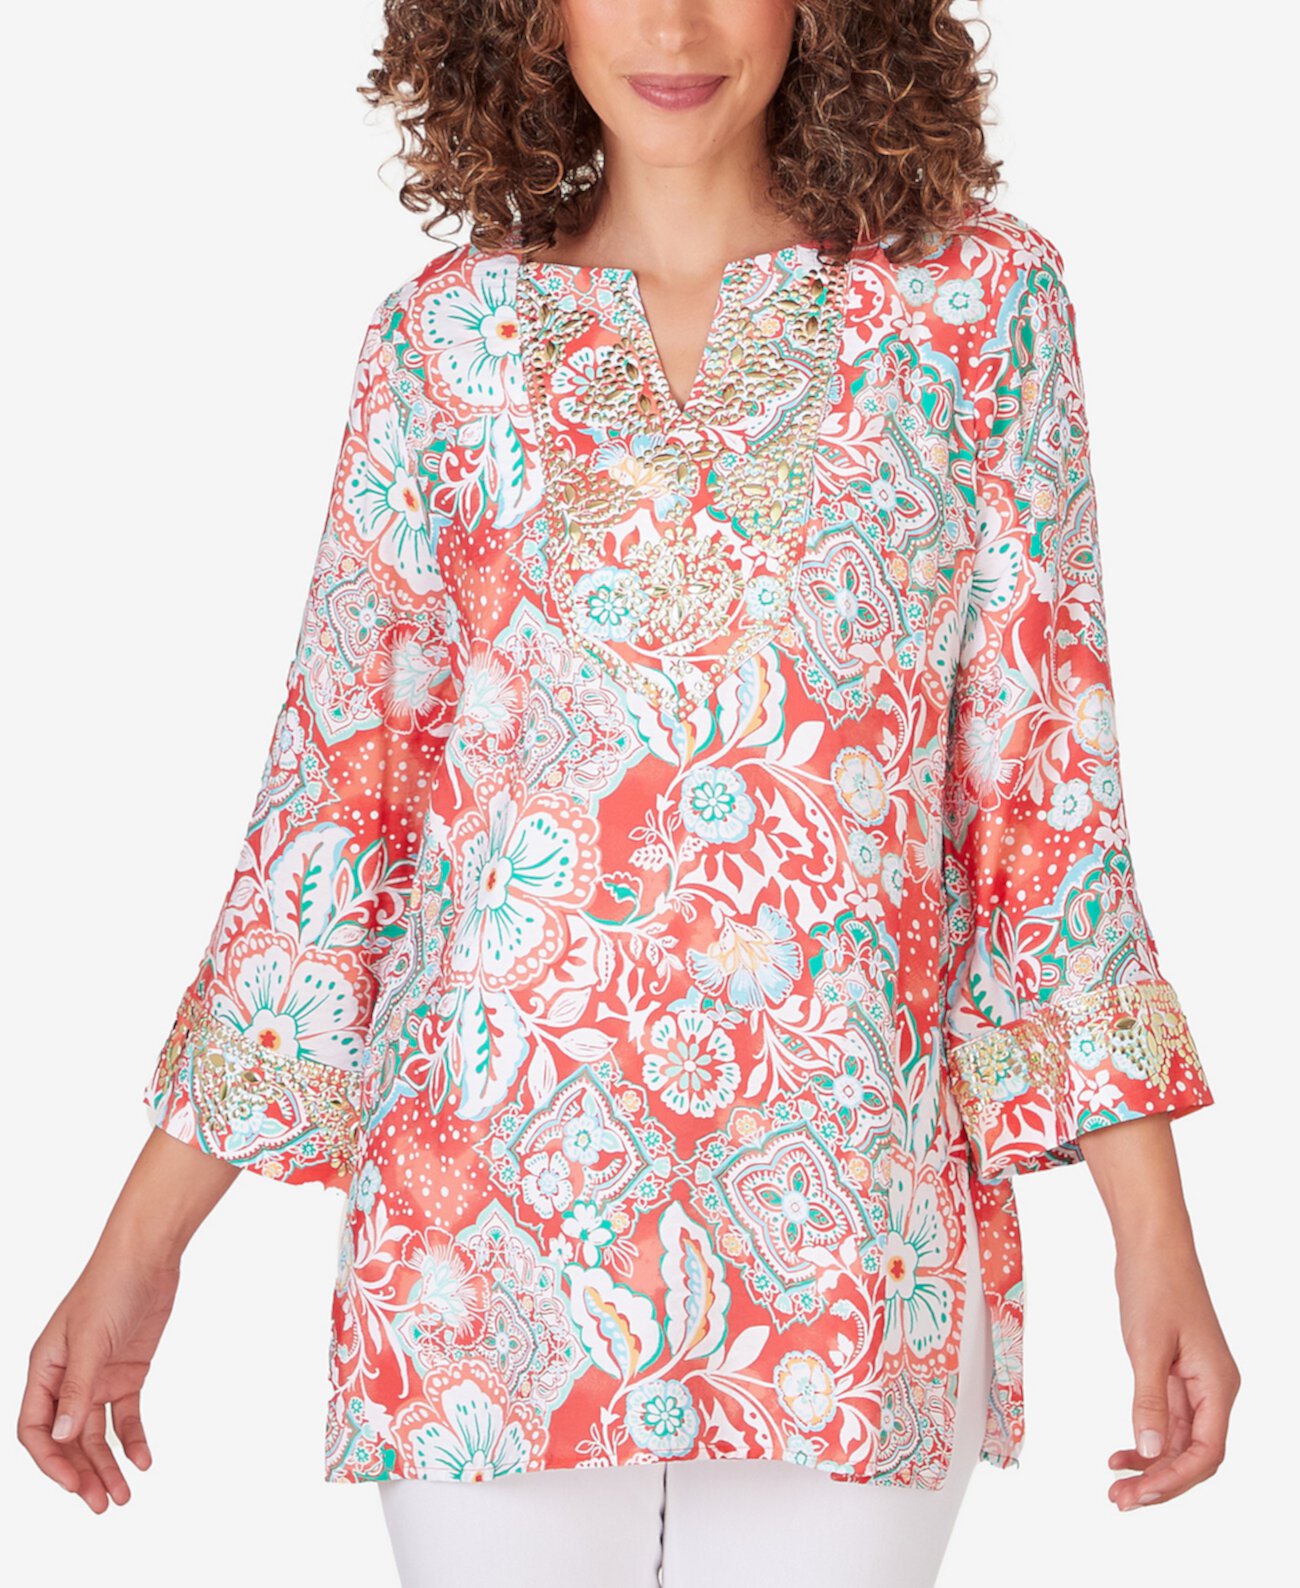 Petite Silky Floral Voile Top Ruby Rd.